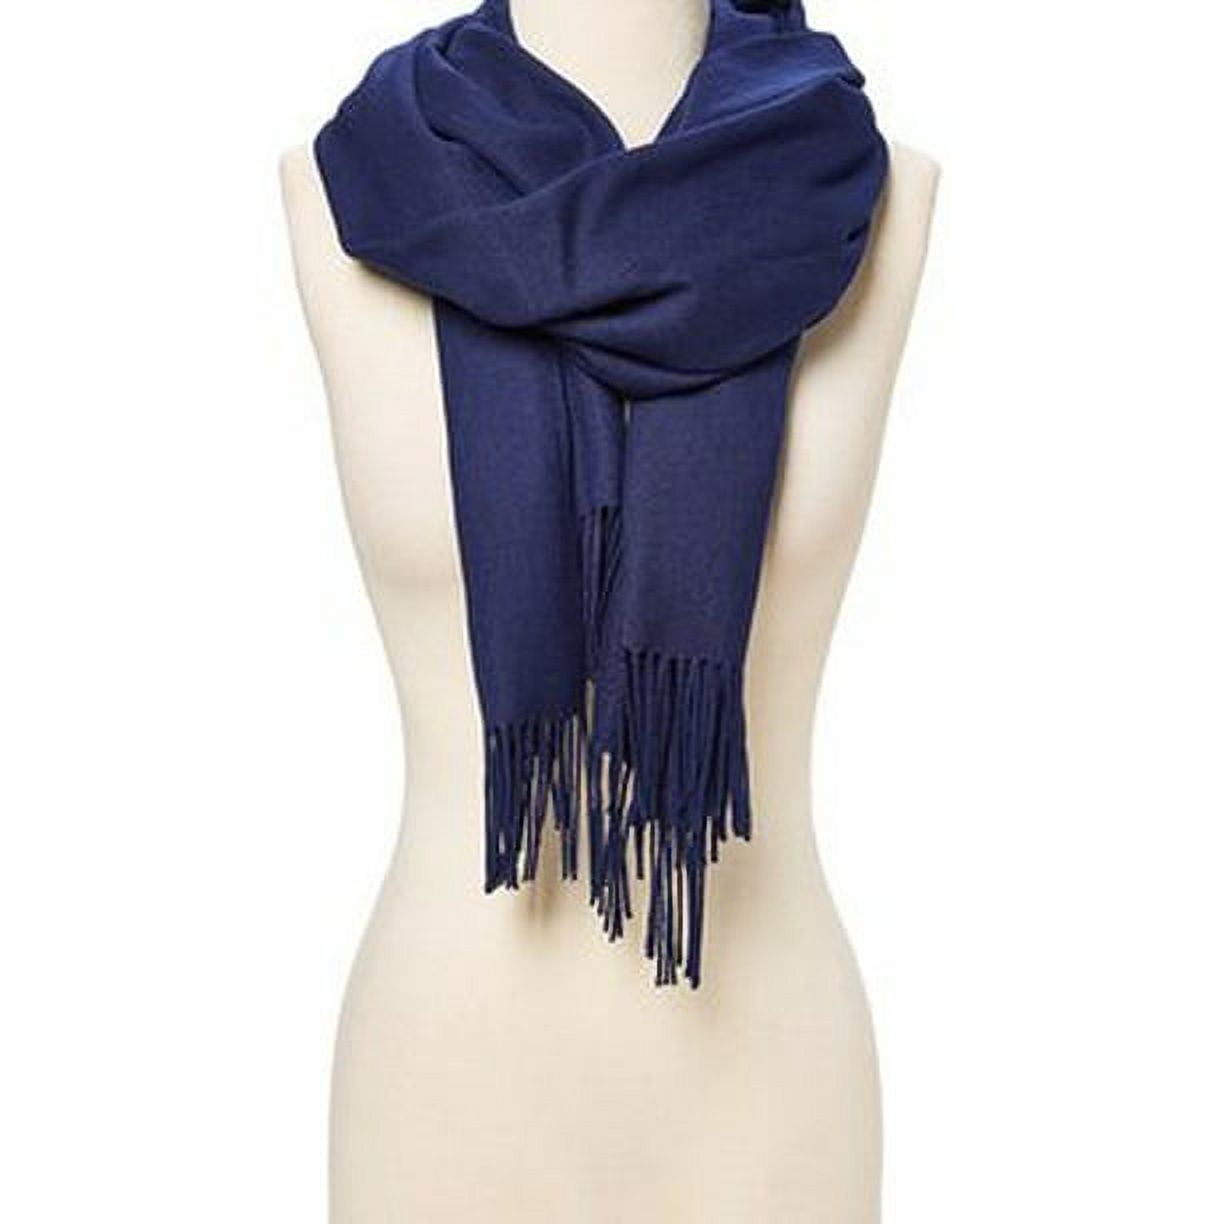 Navy Blue Solid Scarfs for Women Fashion Warm Neck Womens Winter Scarves  Pashmina Silk Scarf Wrap with Fringes for Ladies by Oussum